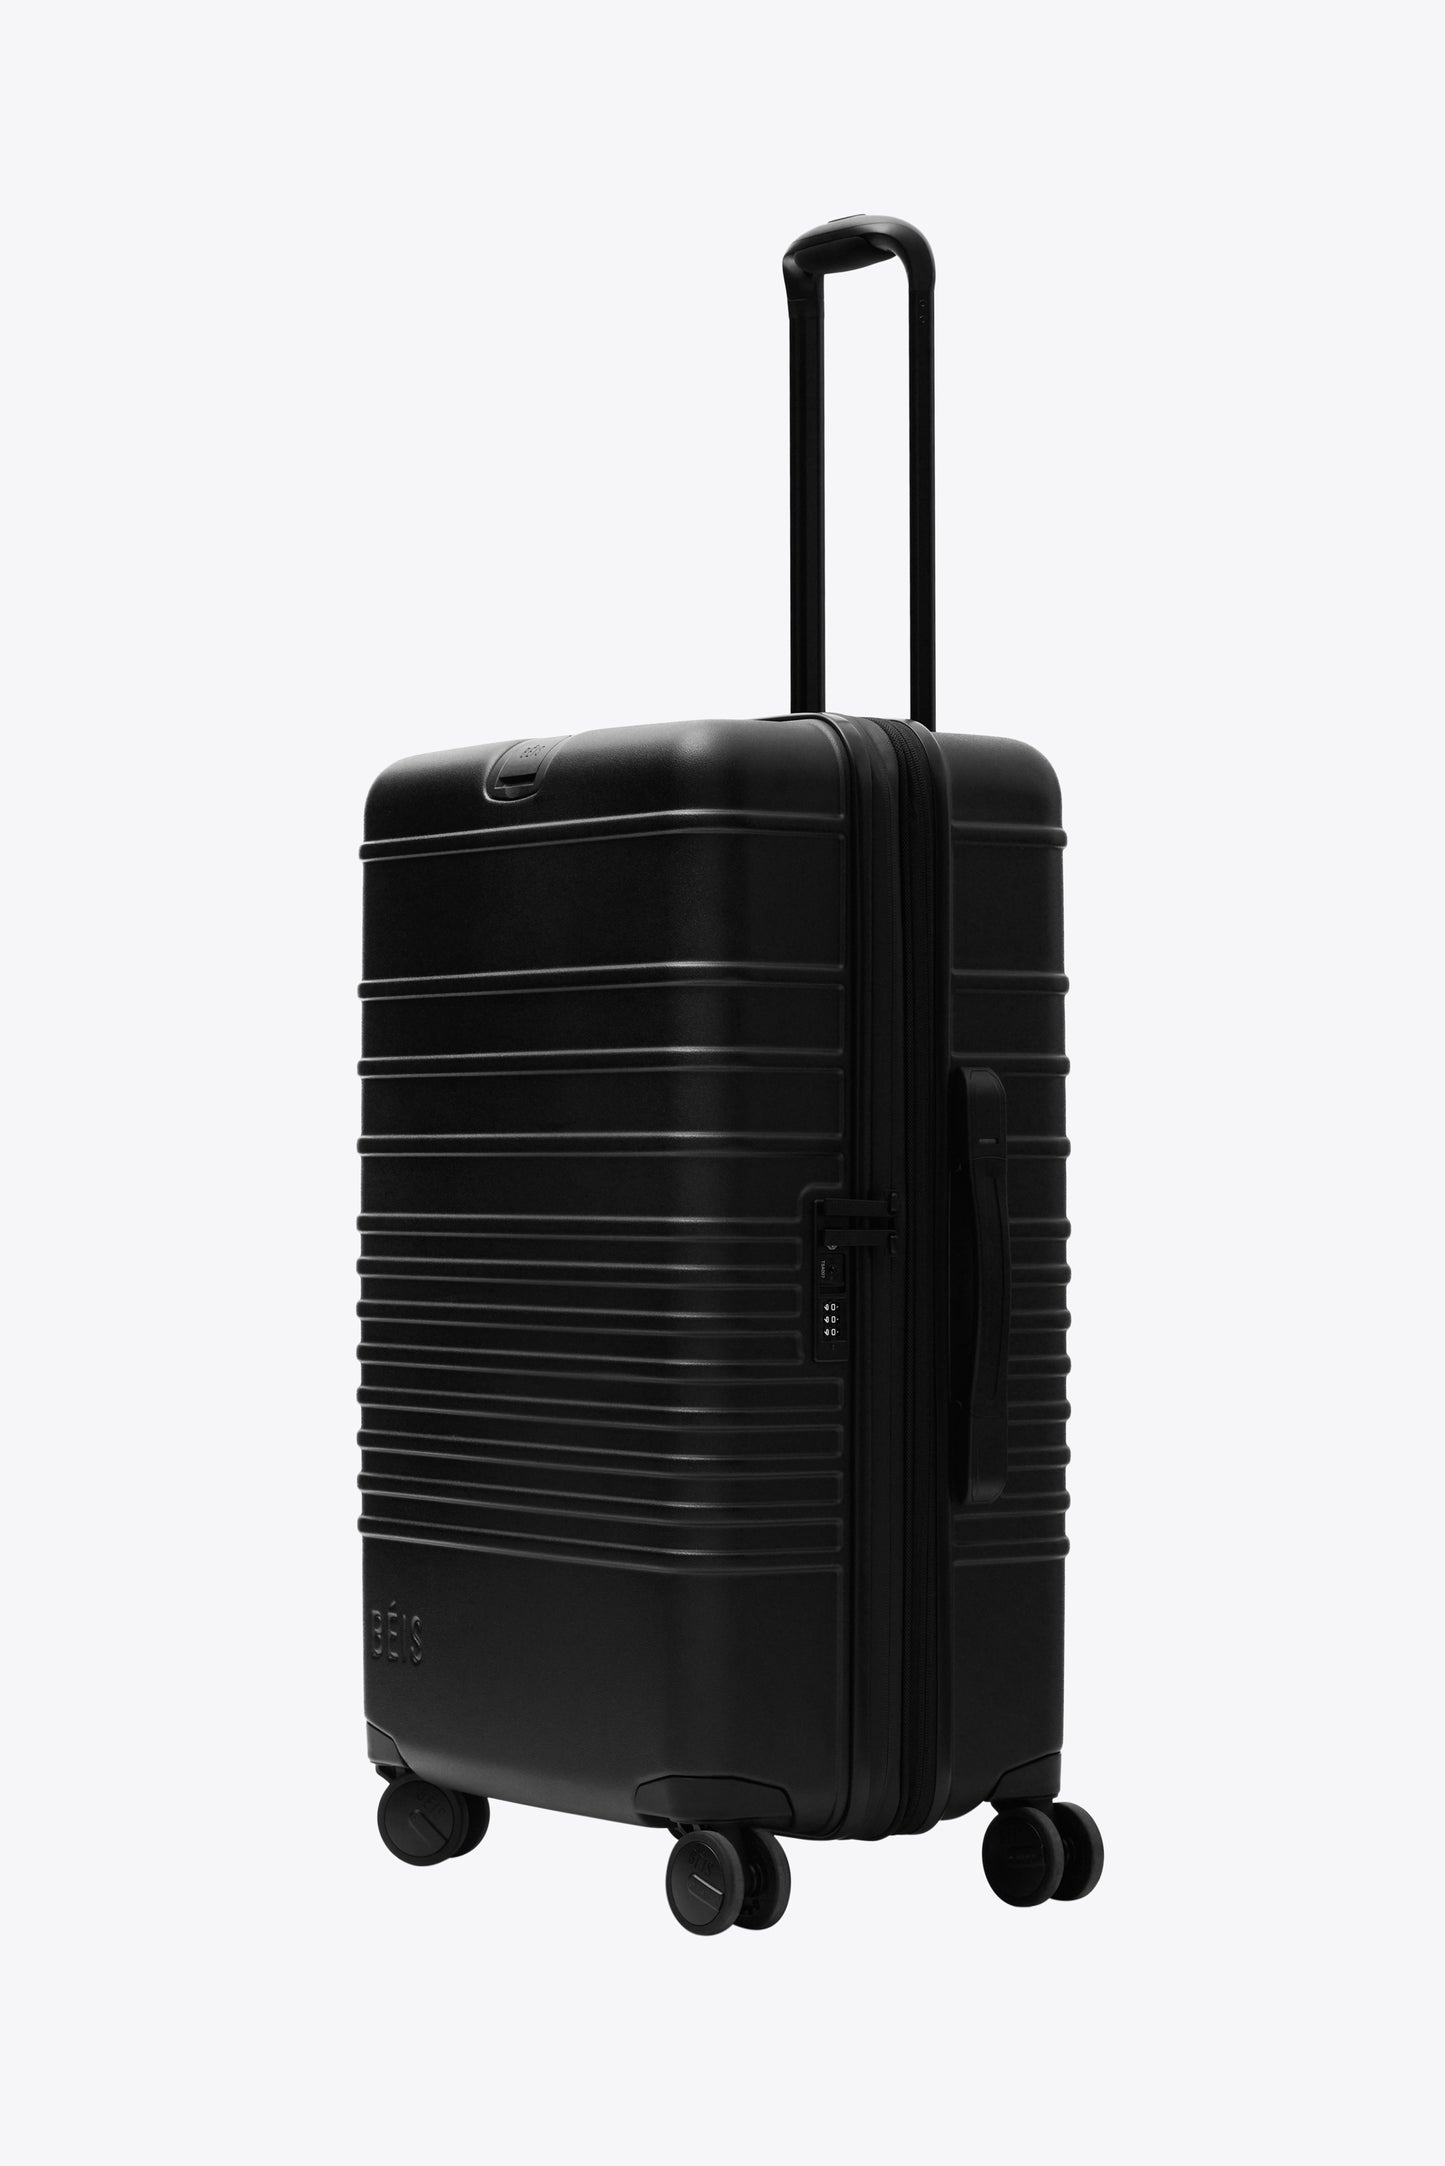 The Medium Check-In Roller in All Black